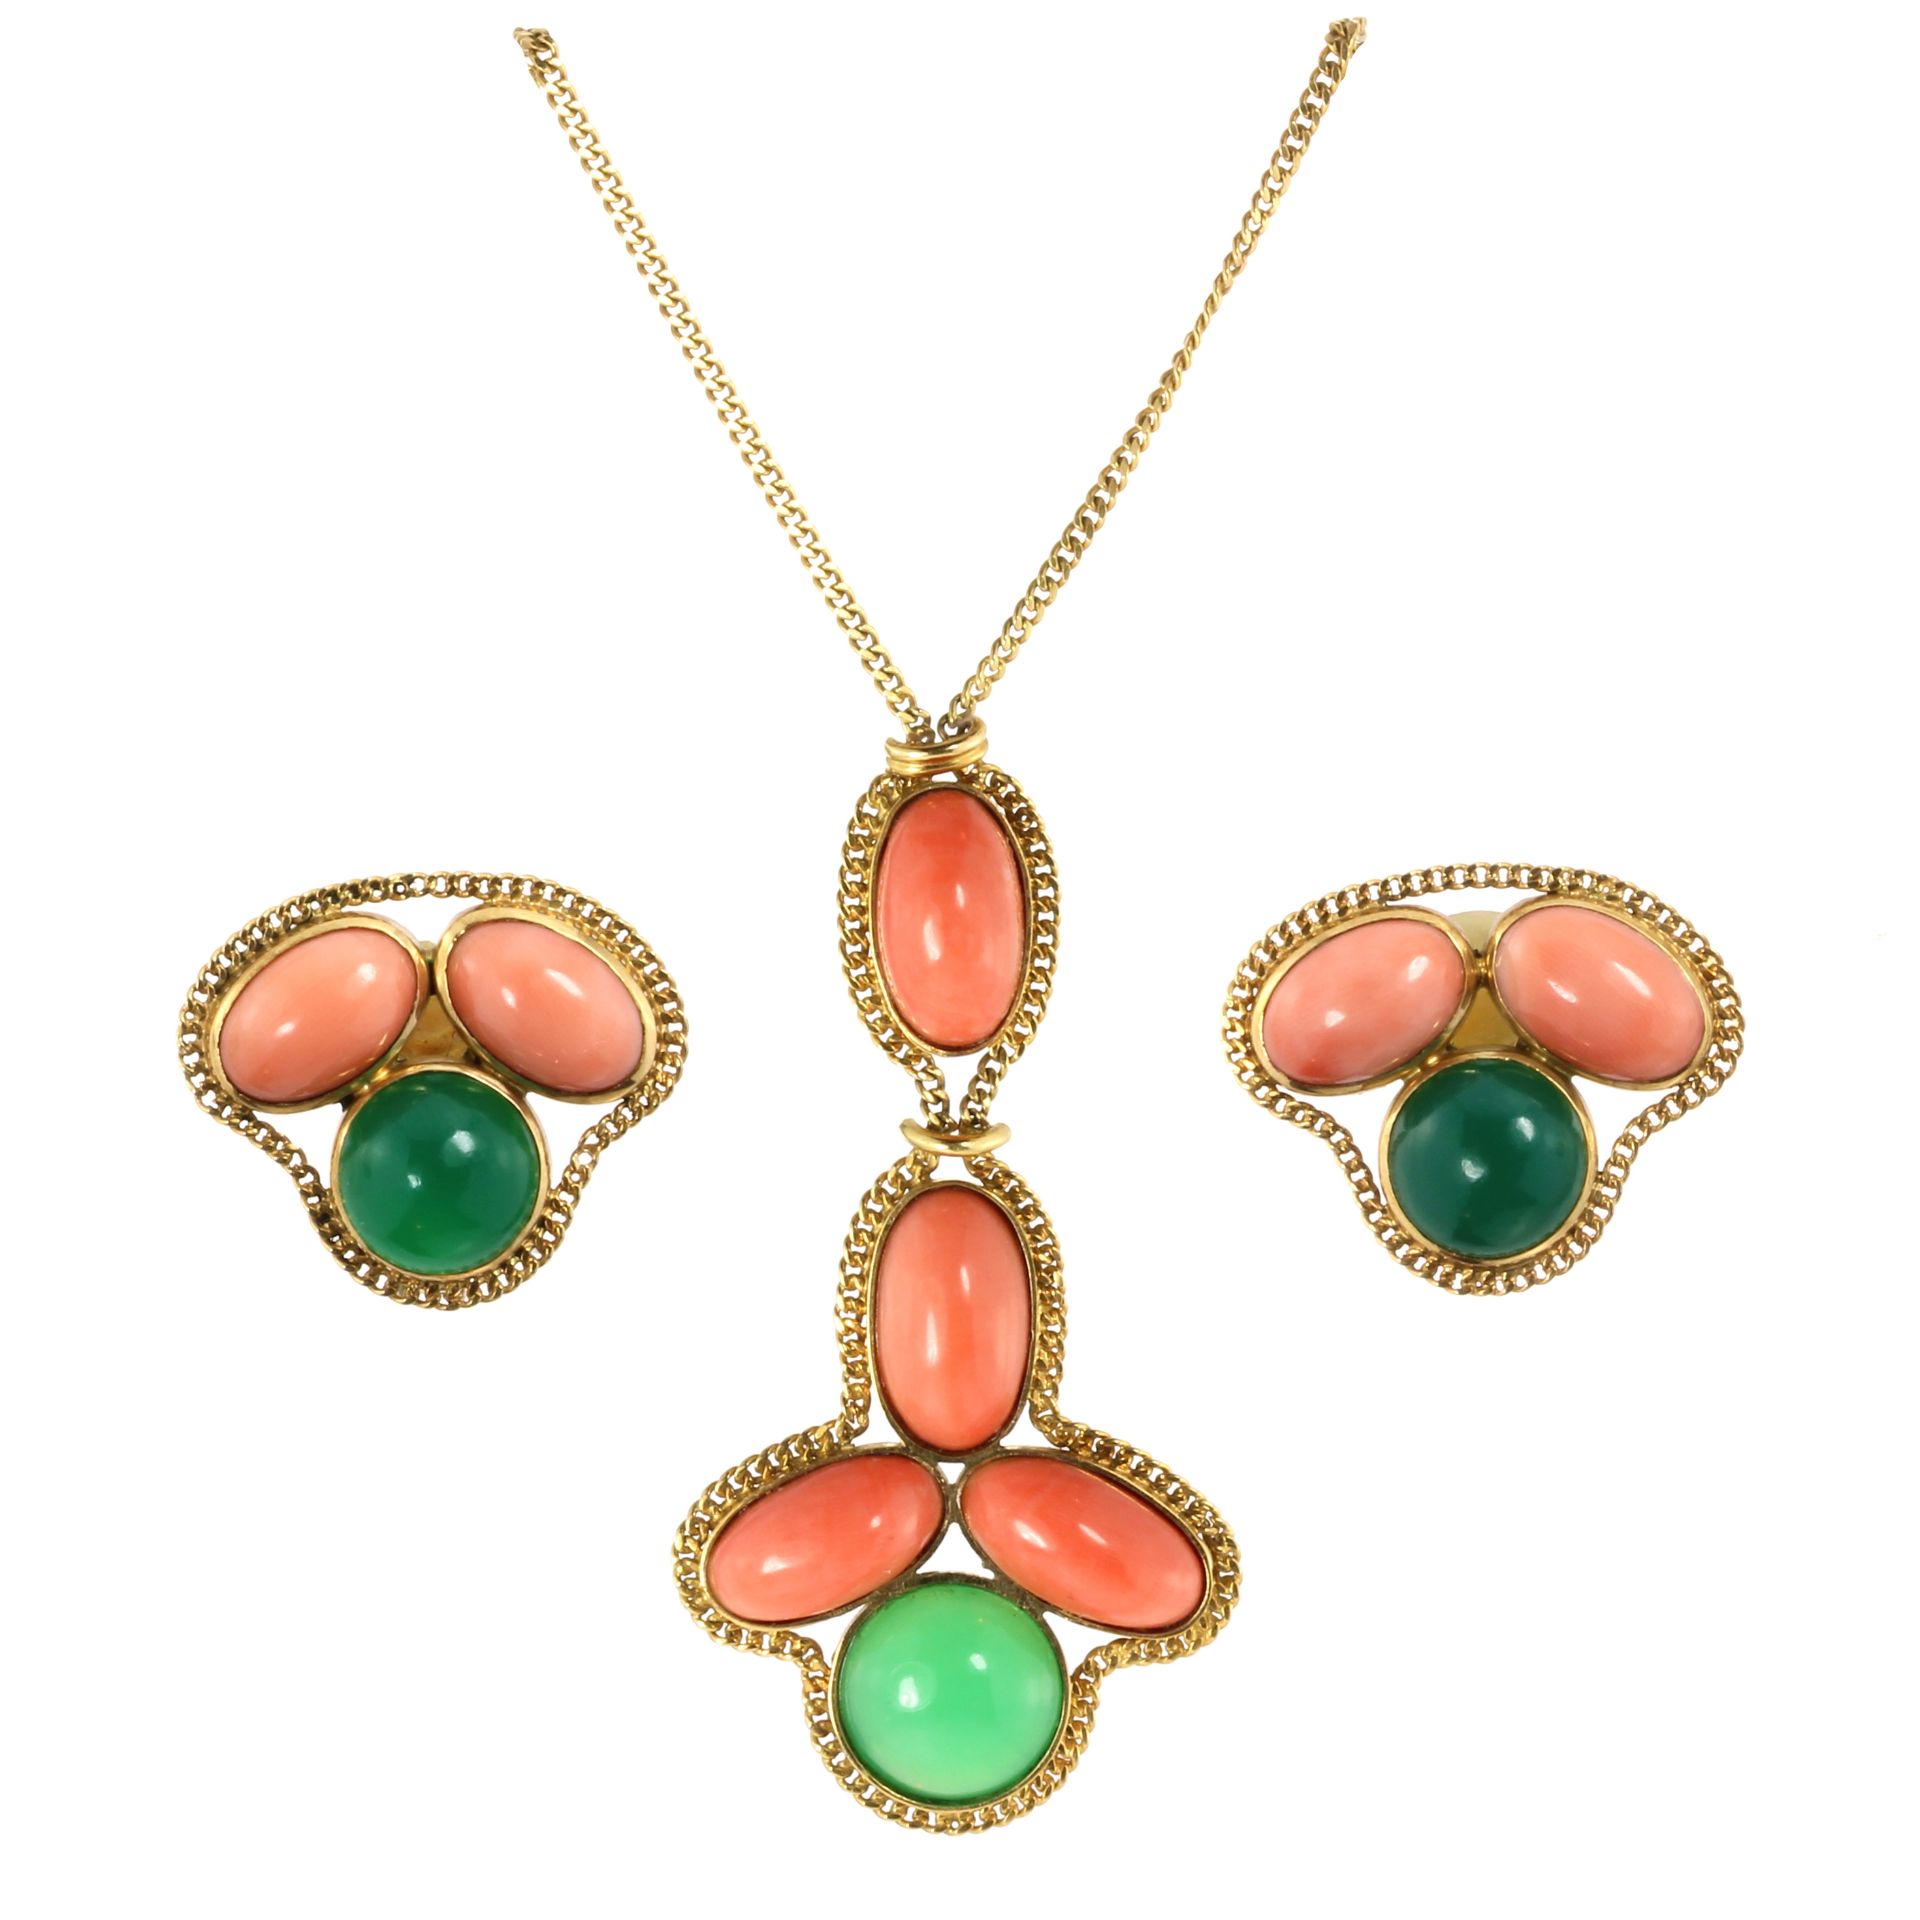 A CORAL AND JADEITE JADE NECKLACE AND CLIP EARRING SUITE each with cabochon coral and jade stones